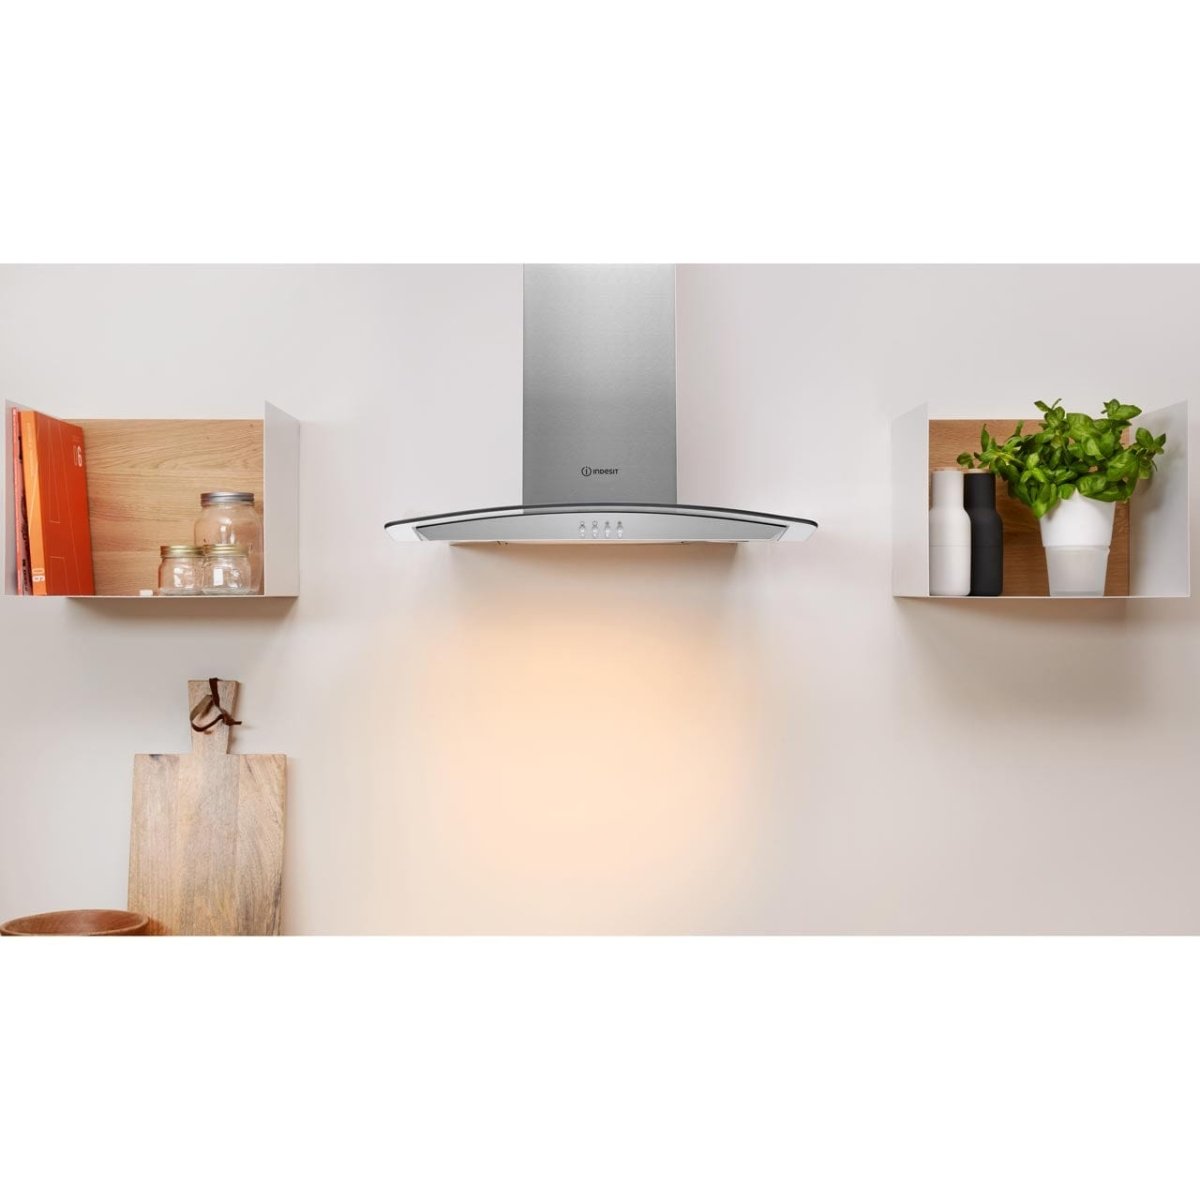 INDESIT IHGC65LMX 60cm Cooker Hood With Curved Glass Canopy - Stainless Steel - Atlantic Electrics